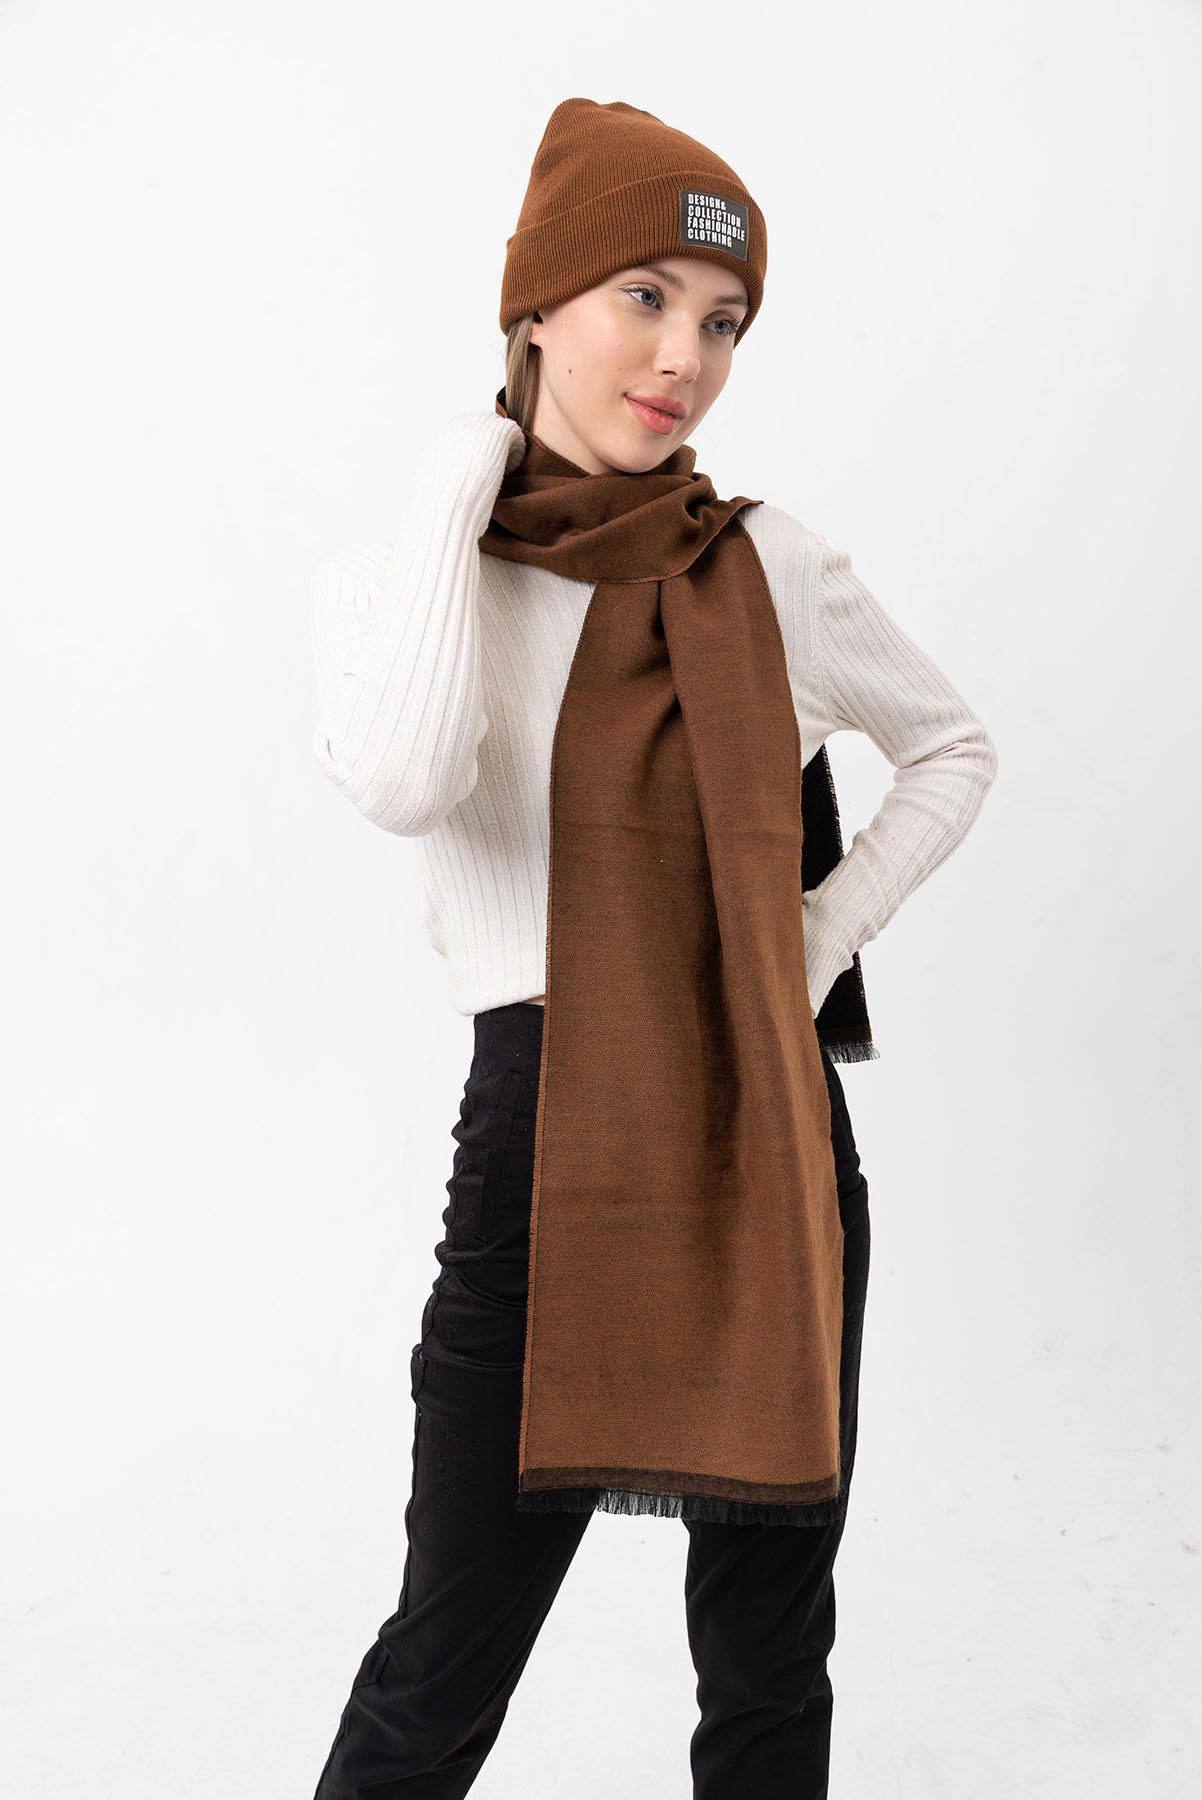 A model wears NSV11127 - Double Sided Black Cashmere Scarf - Camel, wholesale Shawl of Nesvay to display at Lonca